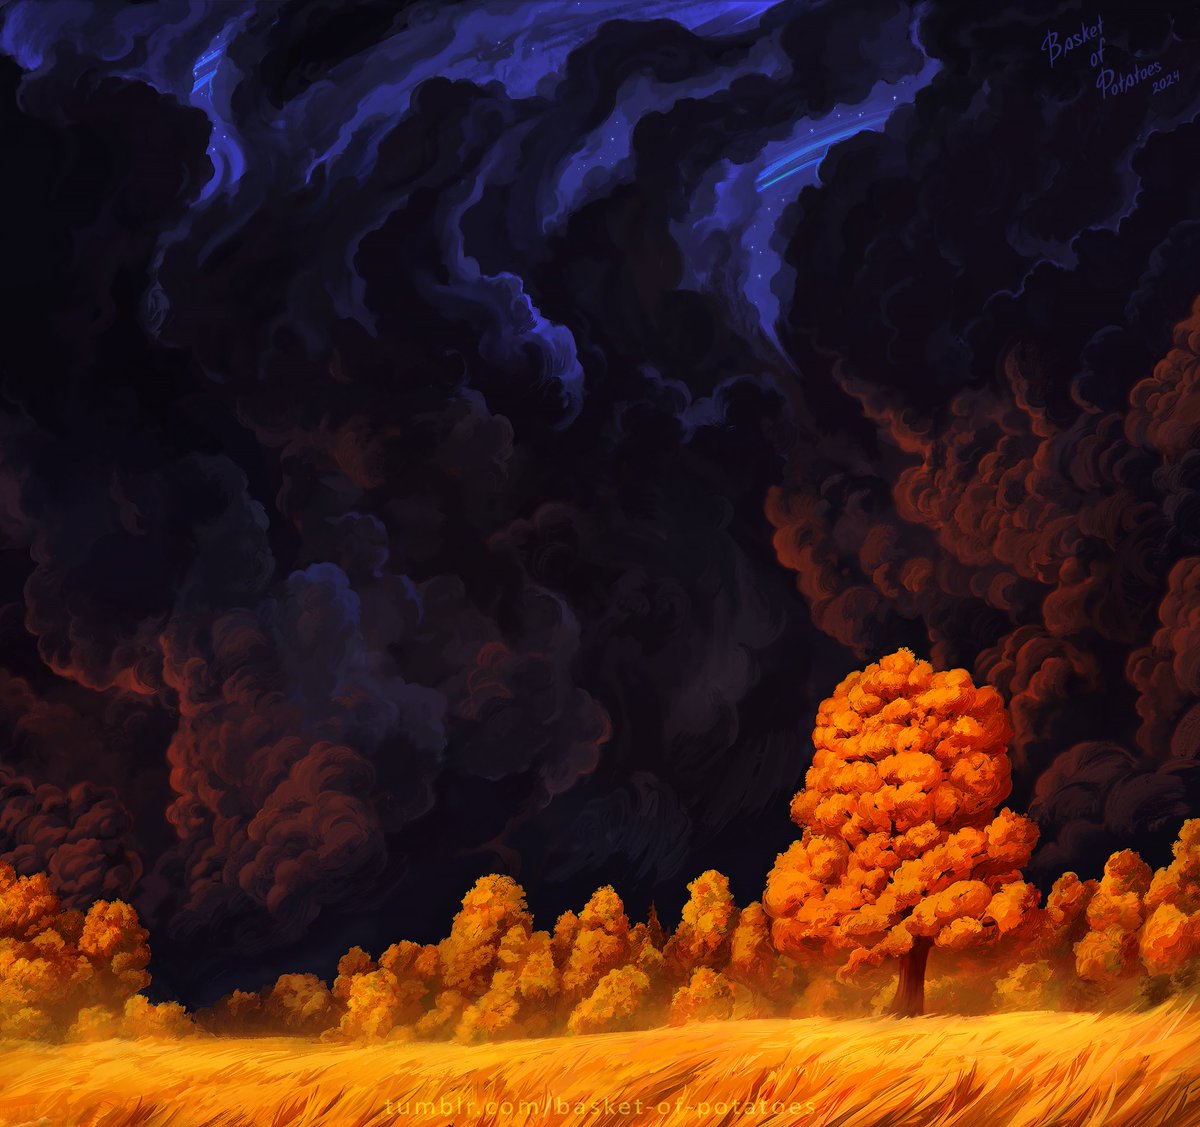 I love blue. So even if i draw a picture, which i want to paint with only grey and different shades of orange and red, in the final i'll add almost a half of the current canvas and paint it with blue :D #landscape #forest #clouds #storm #nature #trees #sunset #art #digitalart